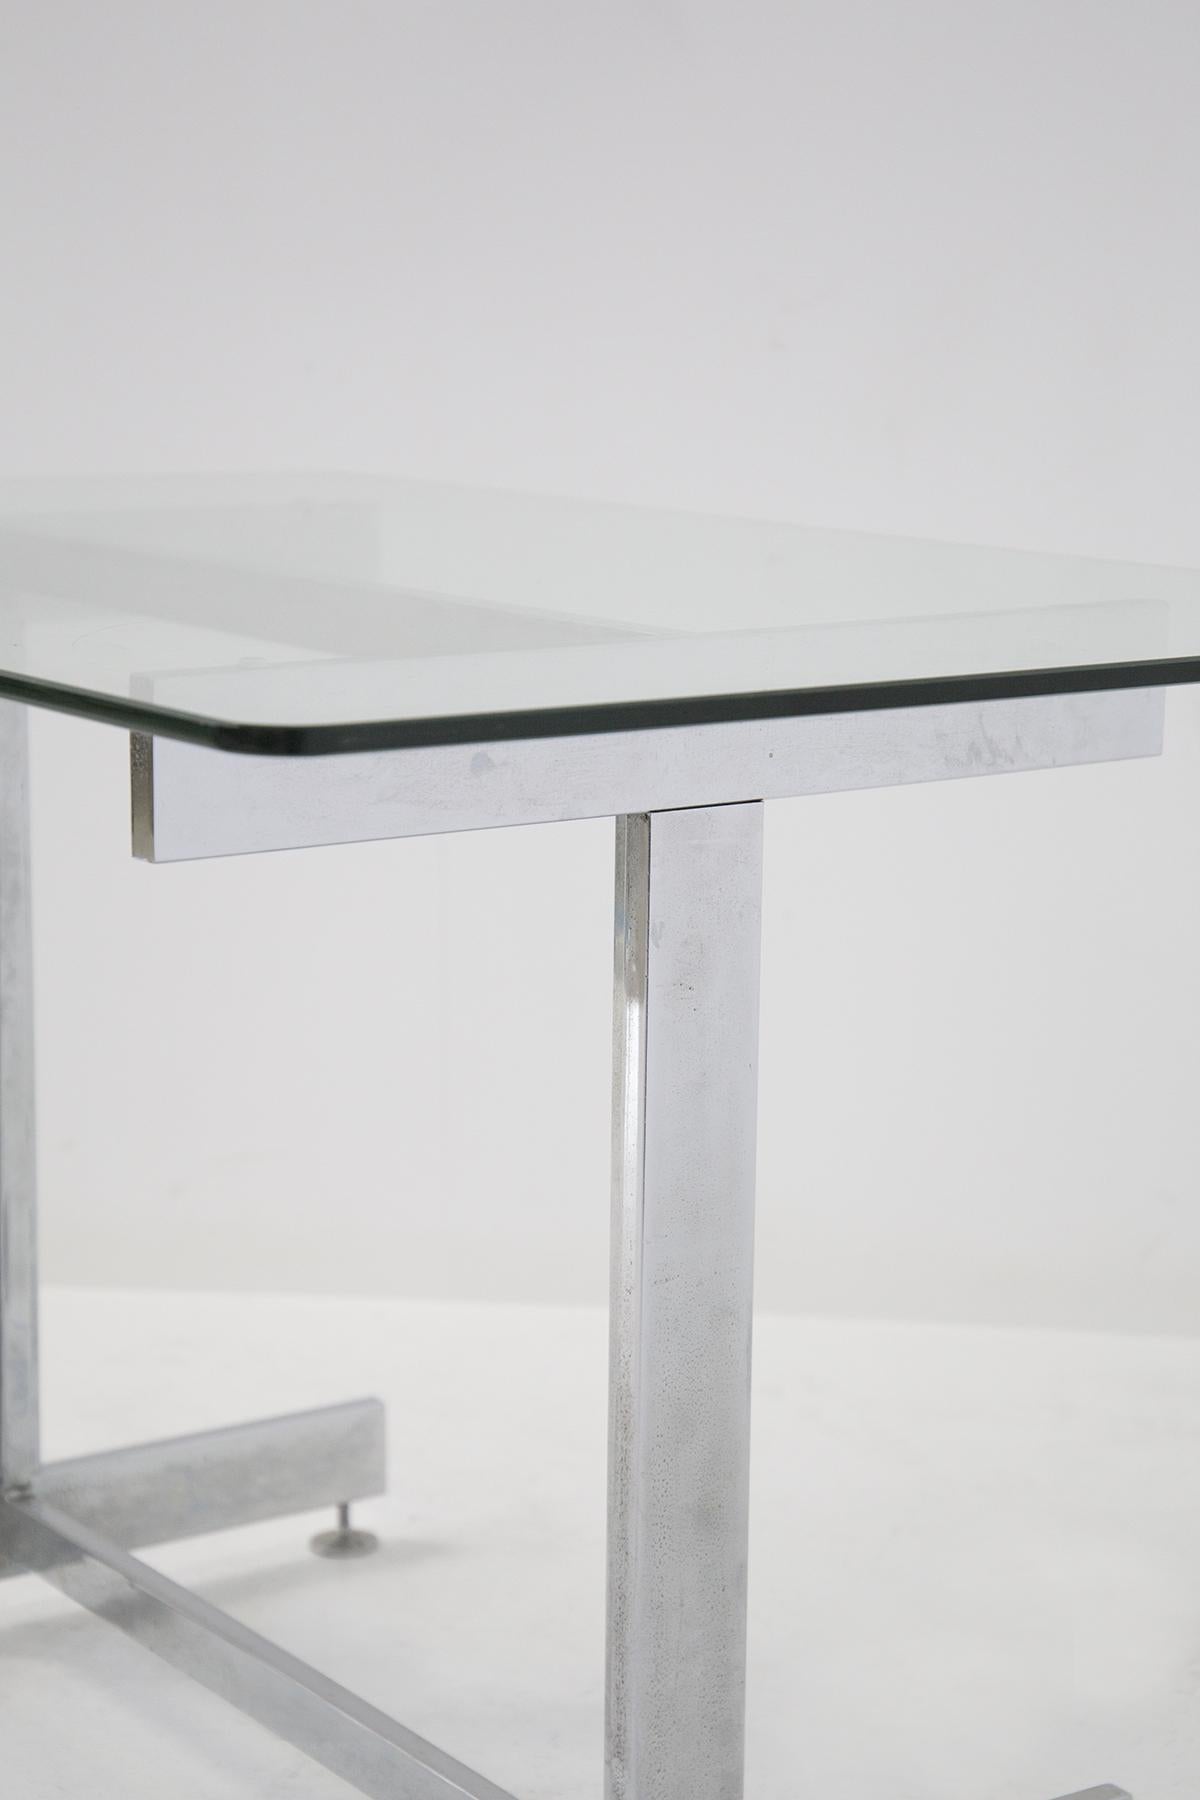 Steel and Glass Desk by Vittorio Introini from Vips Residence 1